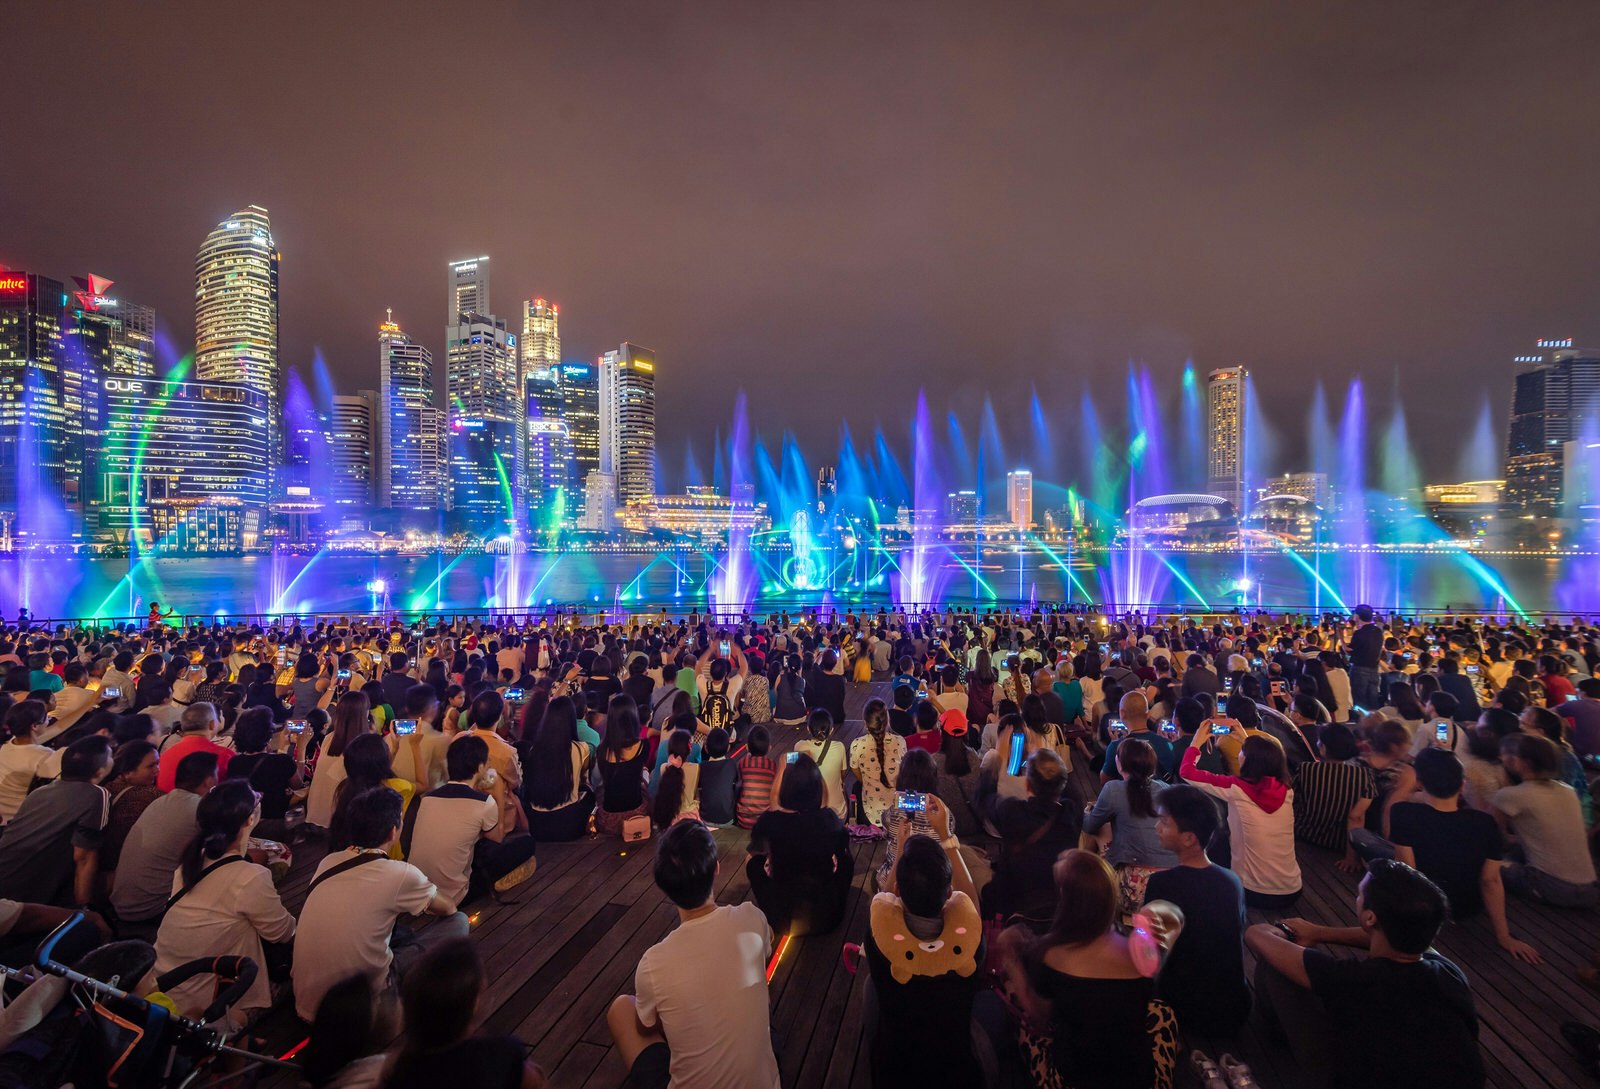 A crowd of people watch a colourful light show with the Singapore skyline backdrop © maison photography / Shutterstock